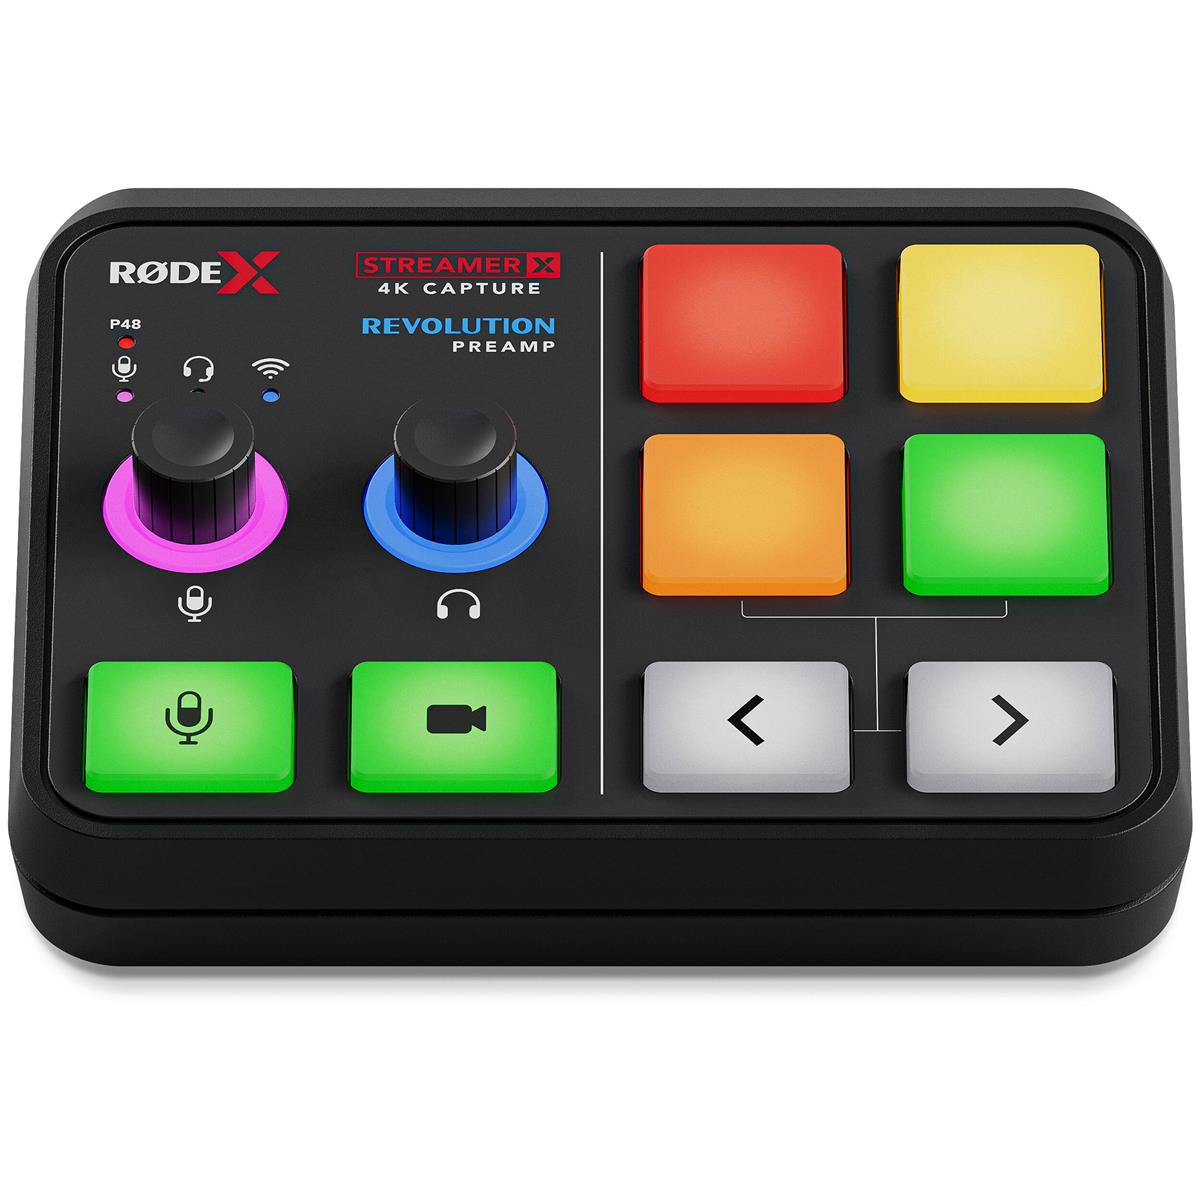 Image of Rode X Streamer X Audio Interface and Video Streaming Console